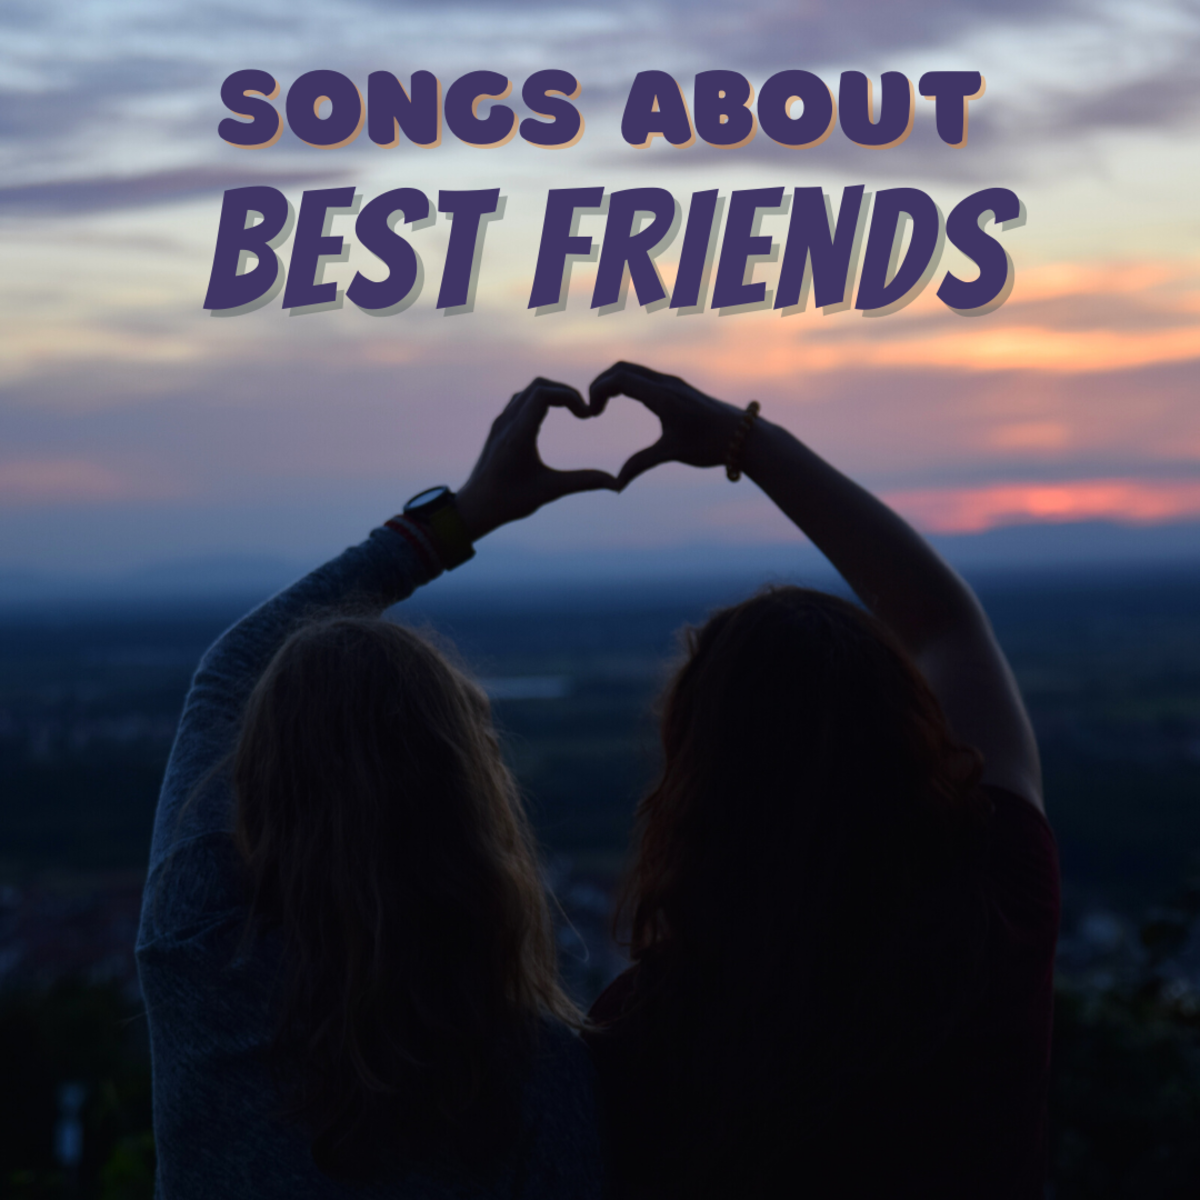 Searching for deep and stirring songs about friendship? Look no further!